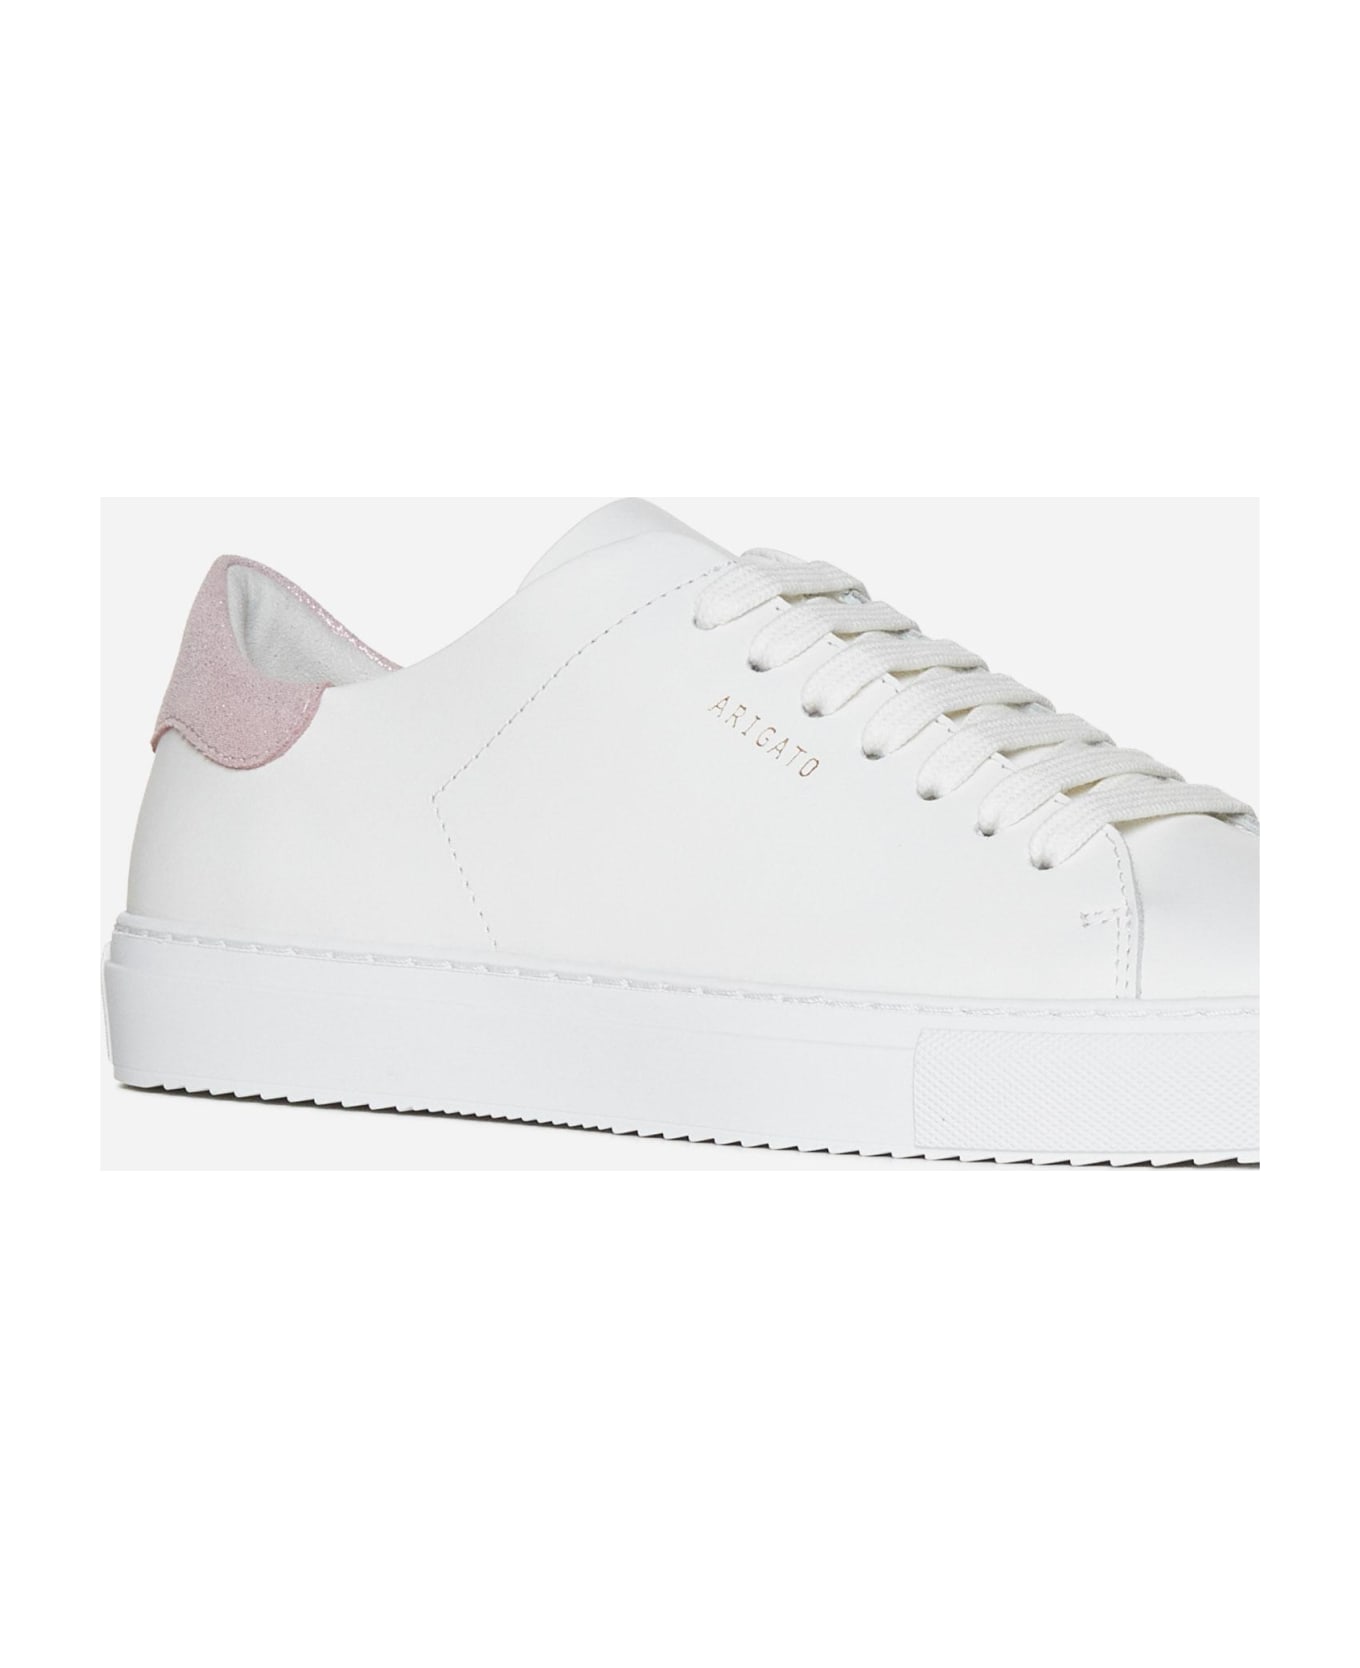 Axel Arigato Clean 90 Leather Sneakers - White Pink